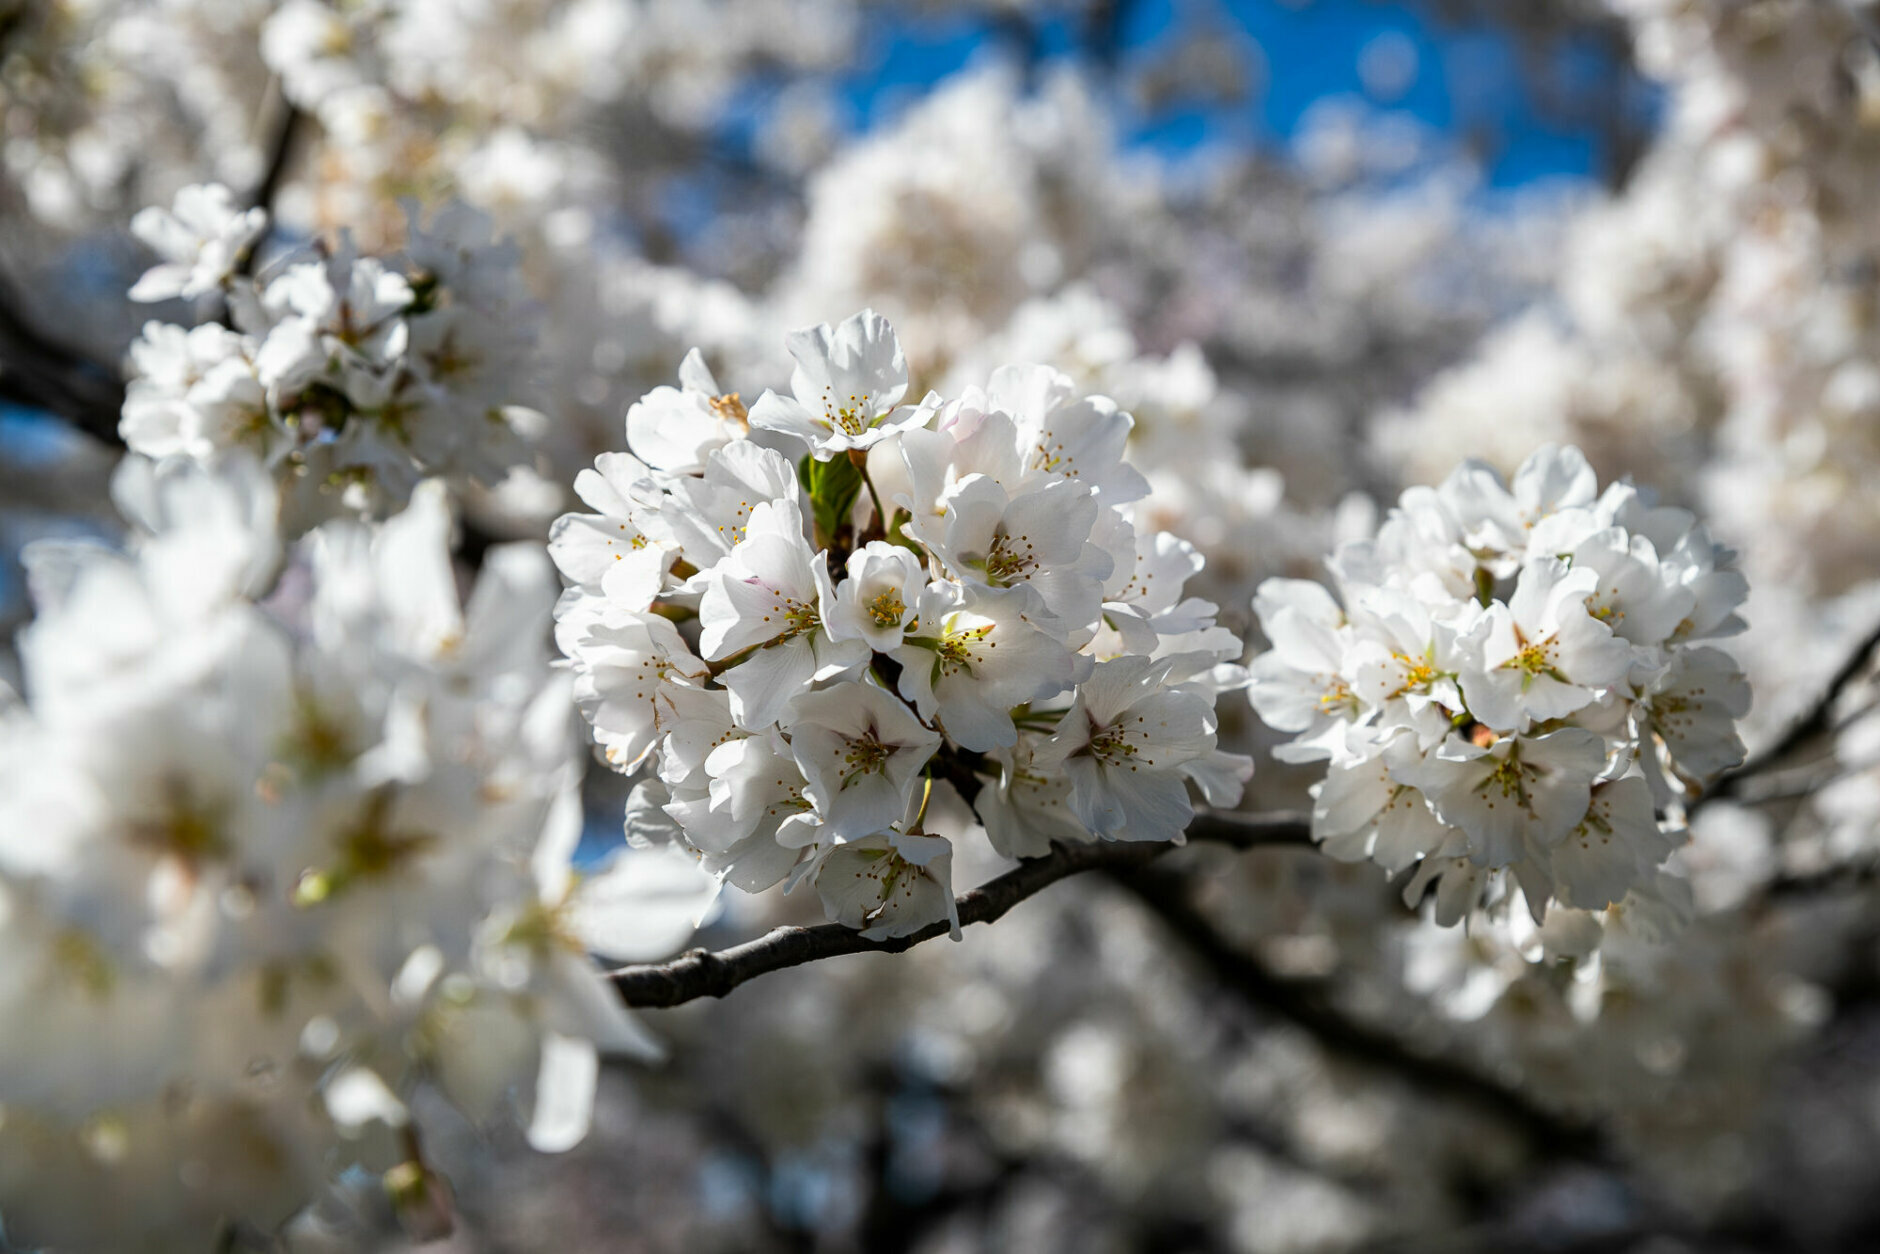 PHOTOS: Cherry blossoms peak ahead of schedule at Tidal Basin, National ...